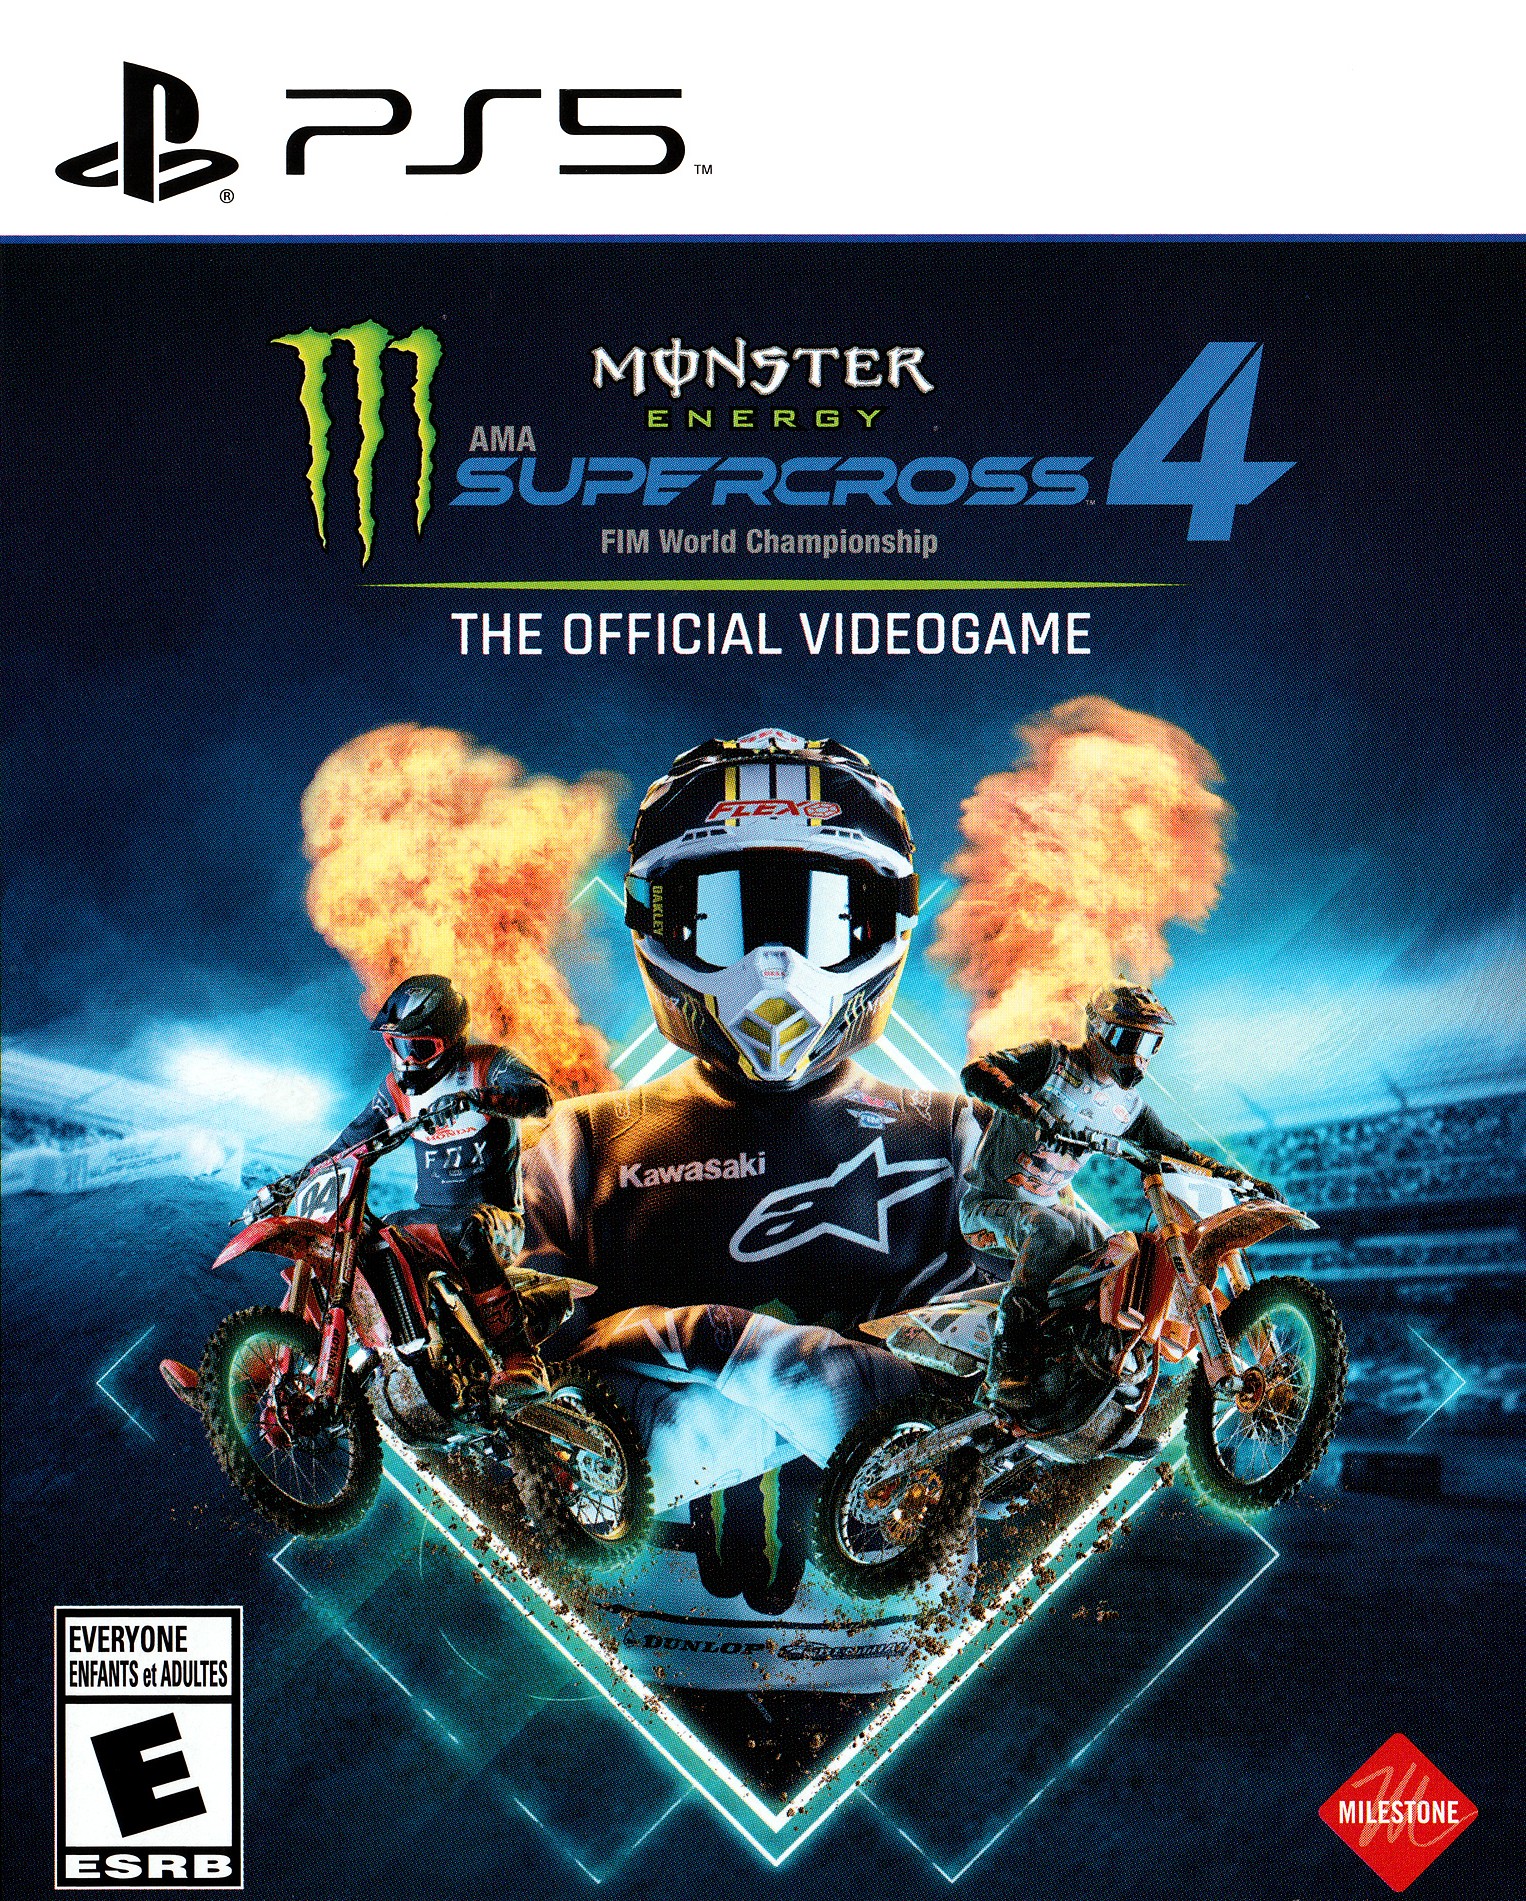 'Monster Energy Supercross 4: The Official Videogame'